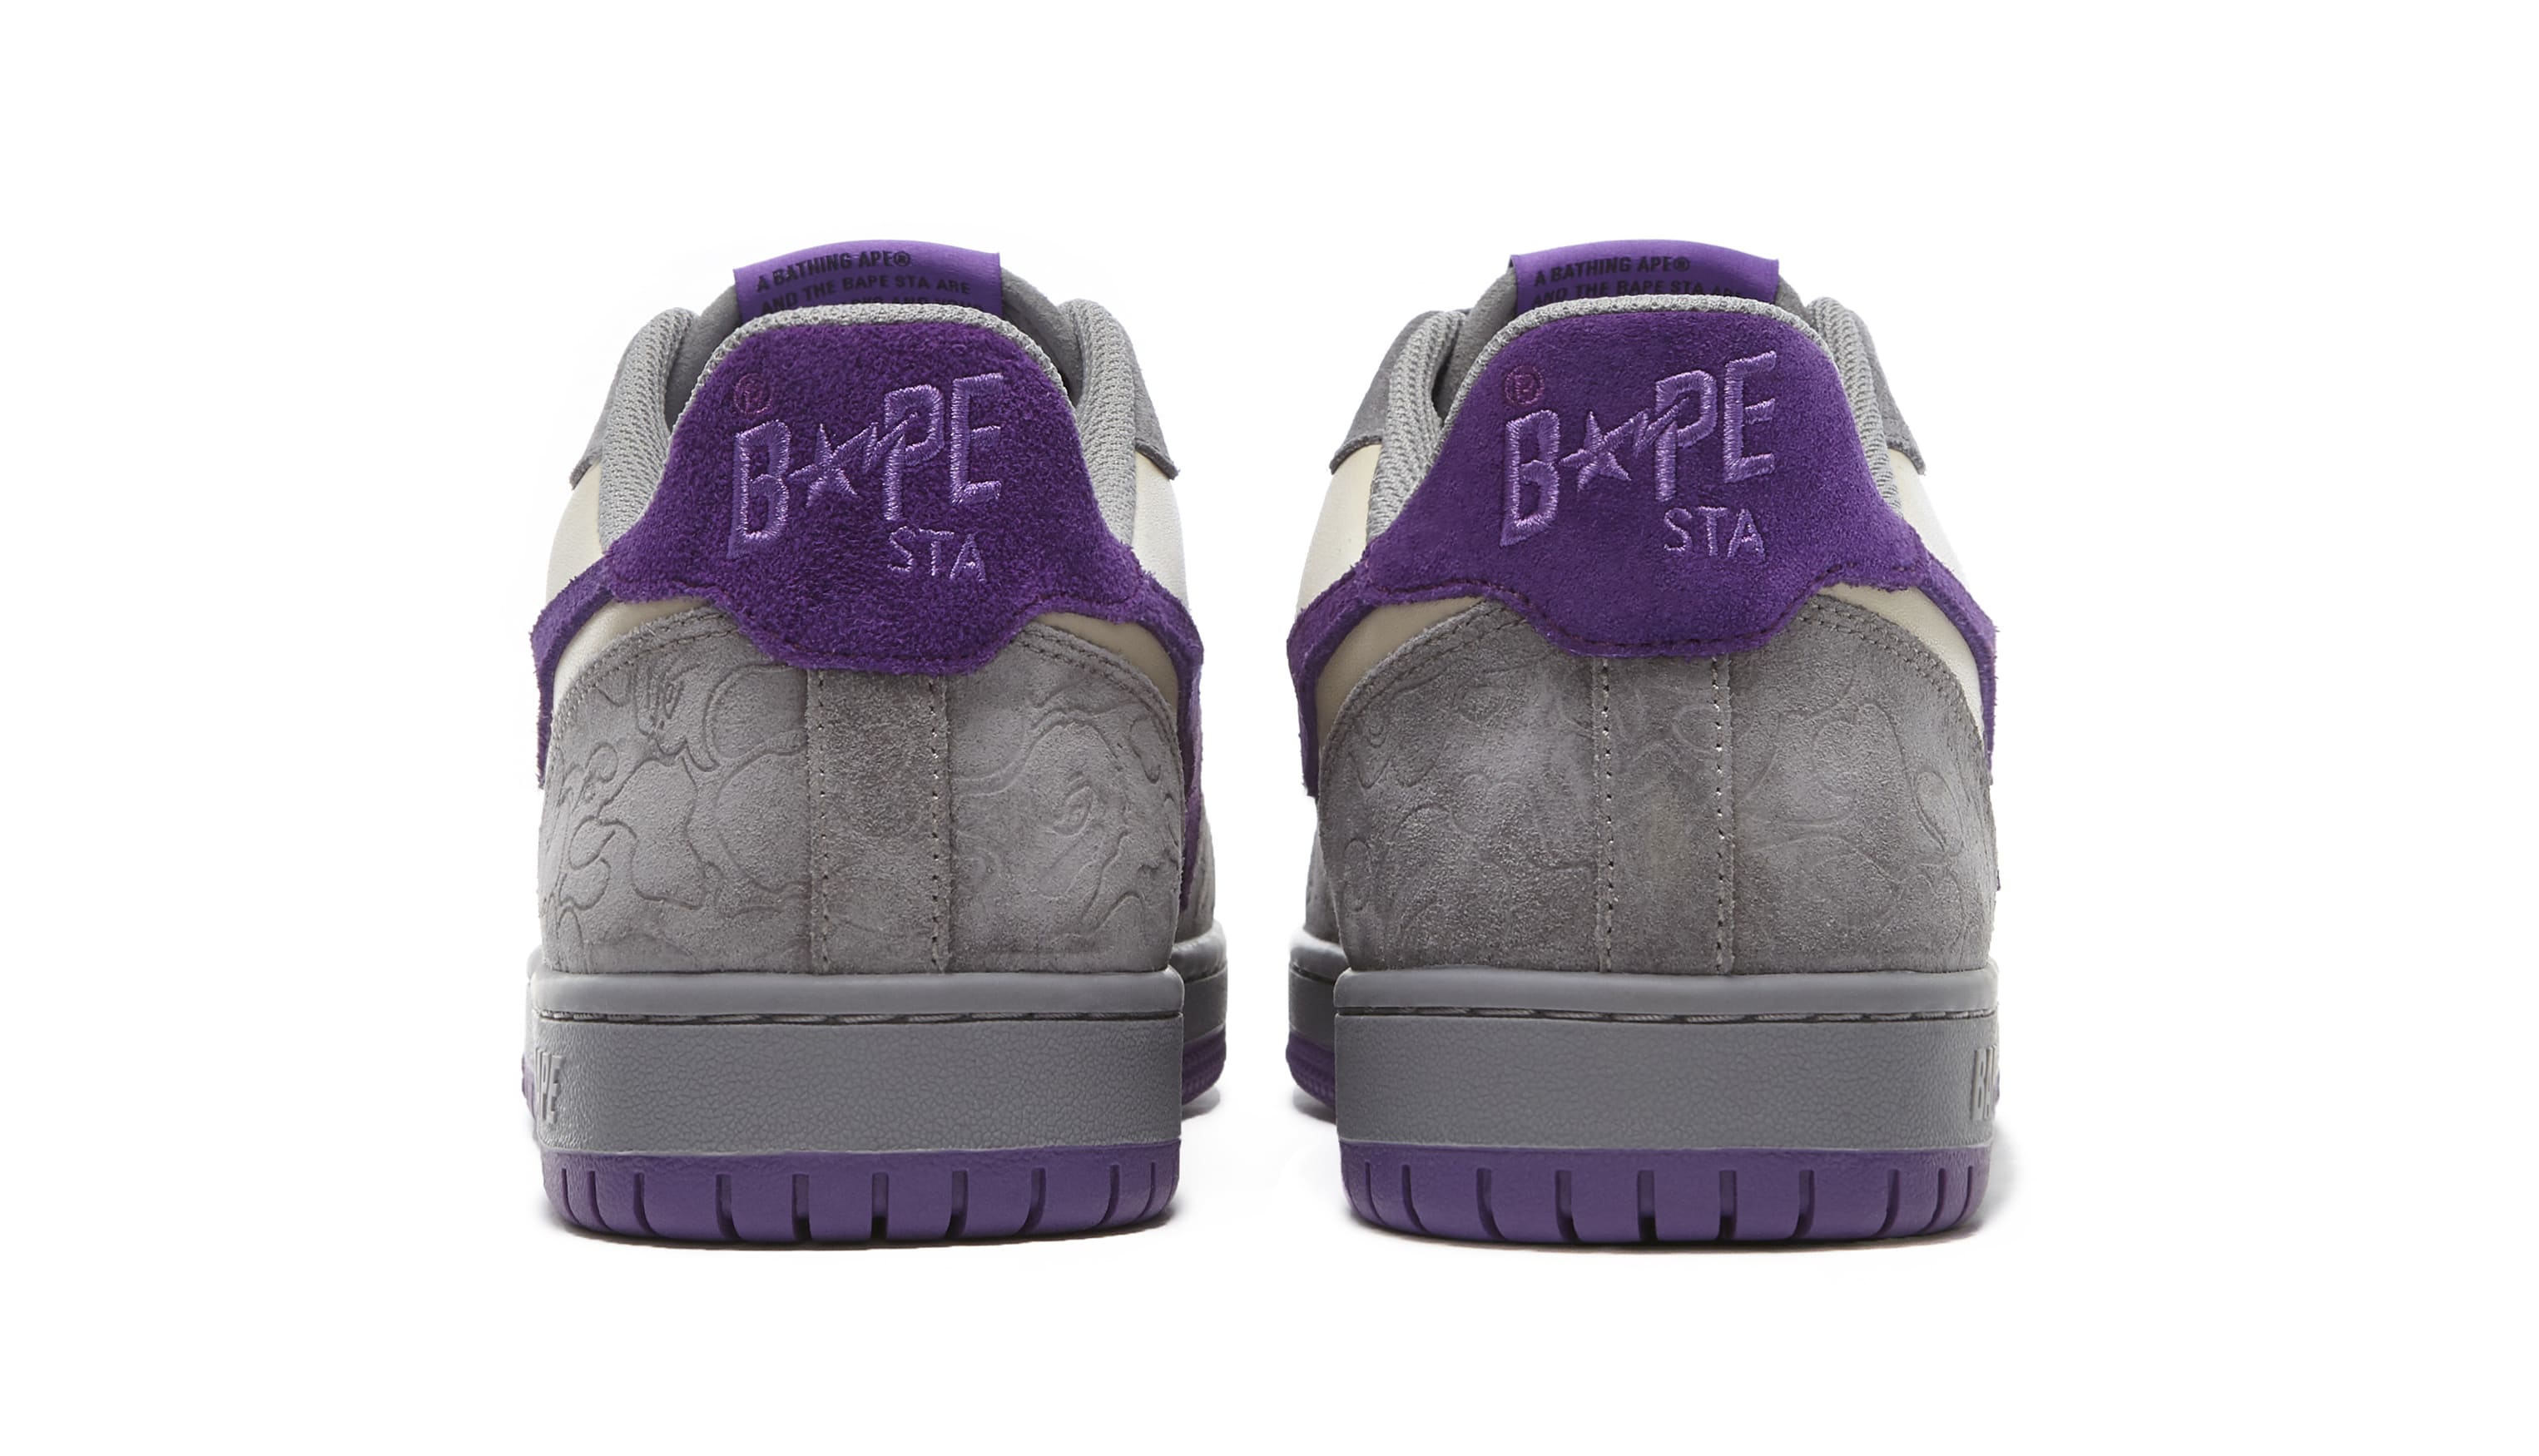 Bape's Court Stas Are Dropping Next Week | Complex